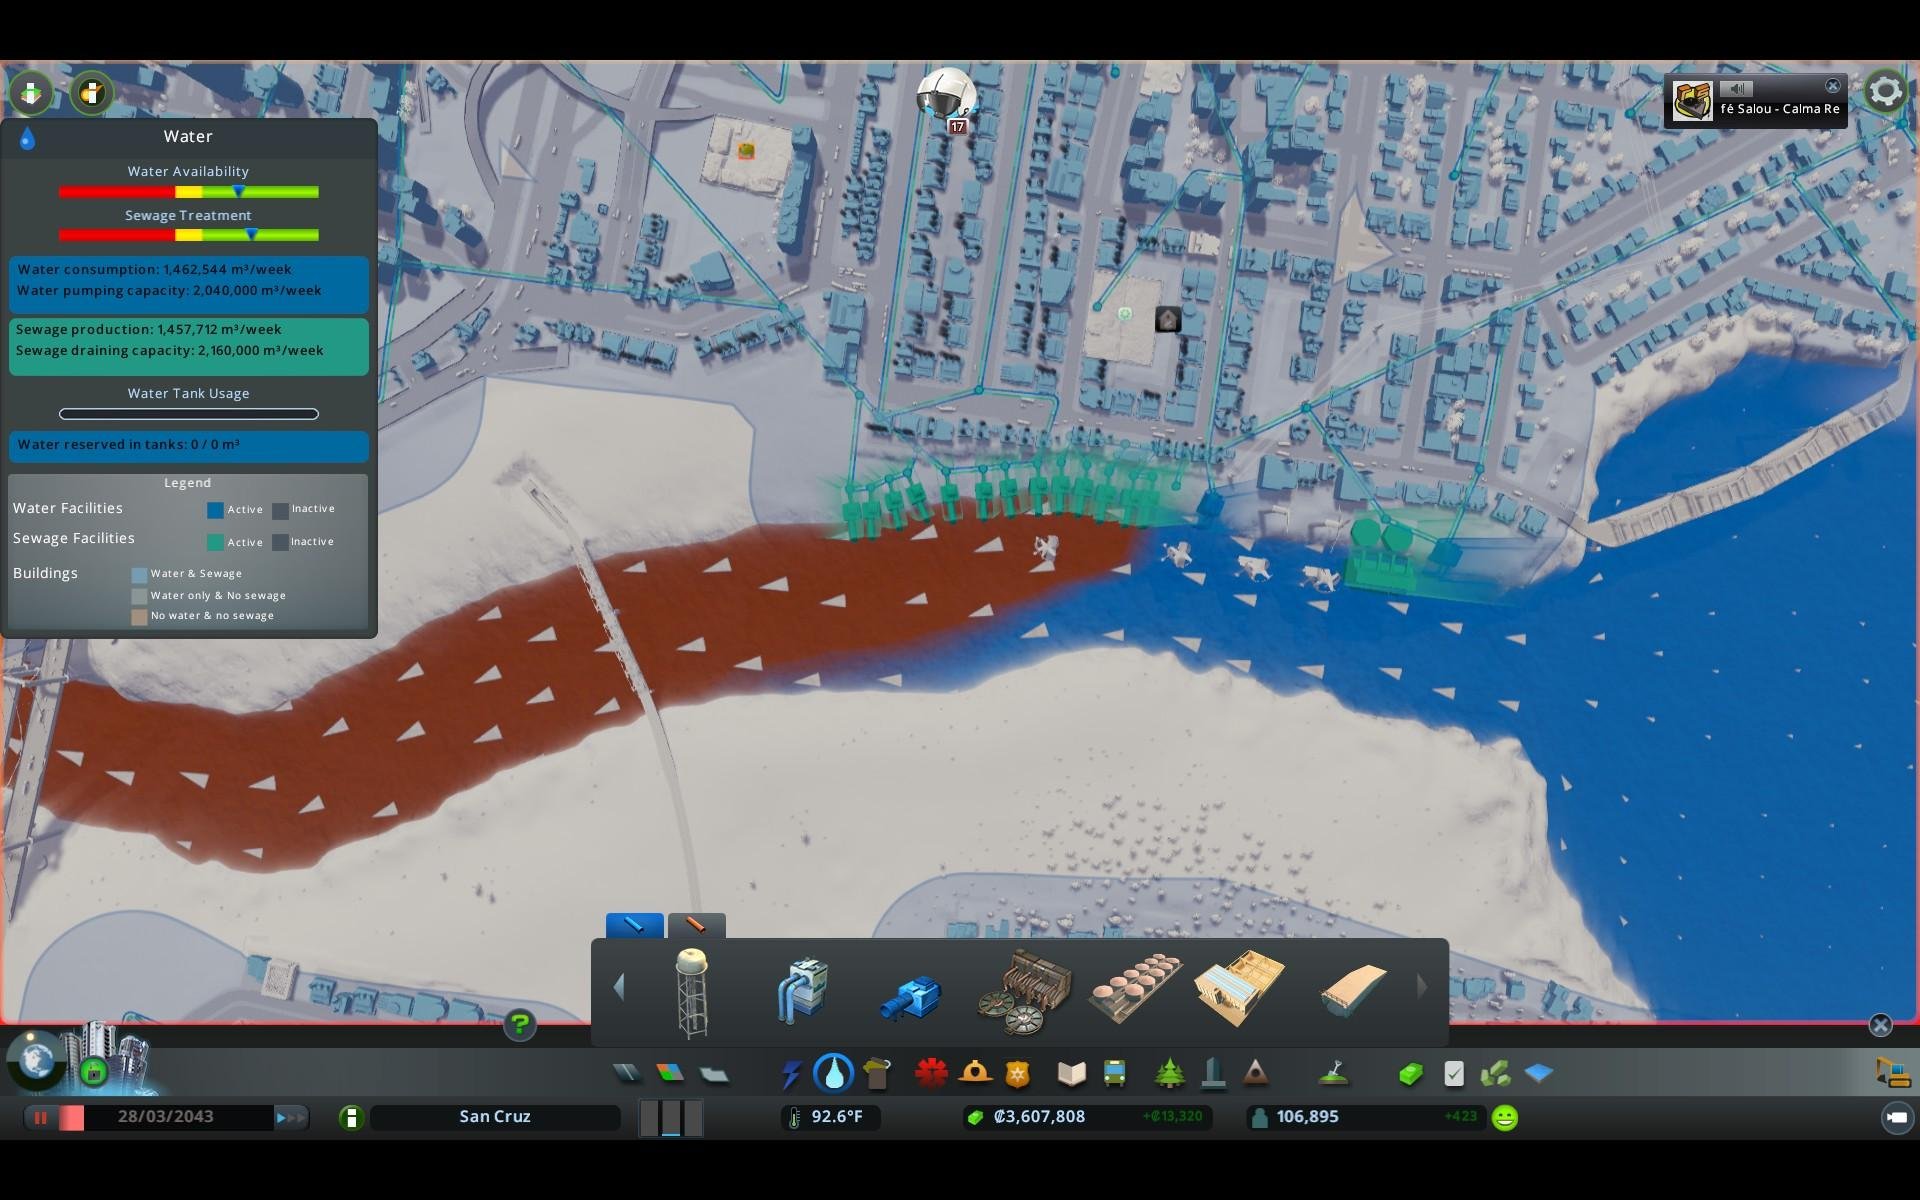 traffic manager cities skylines xbox one dlc